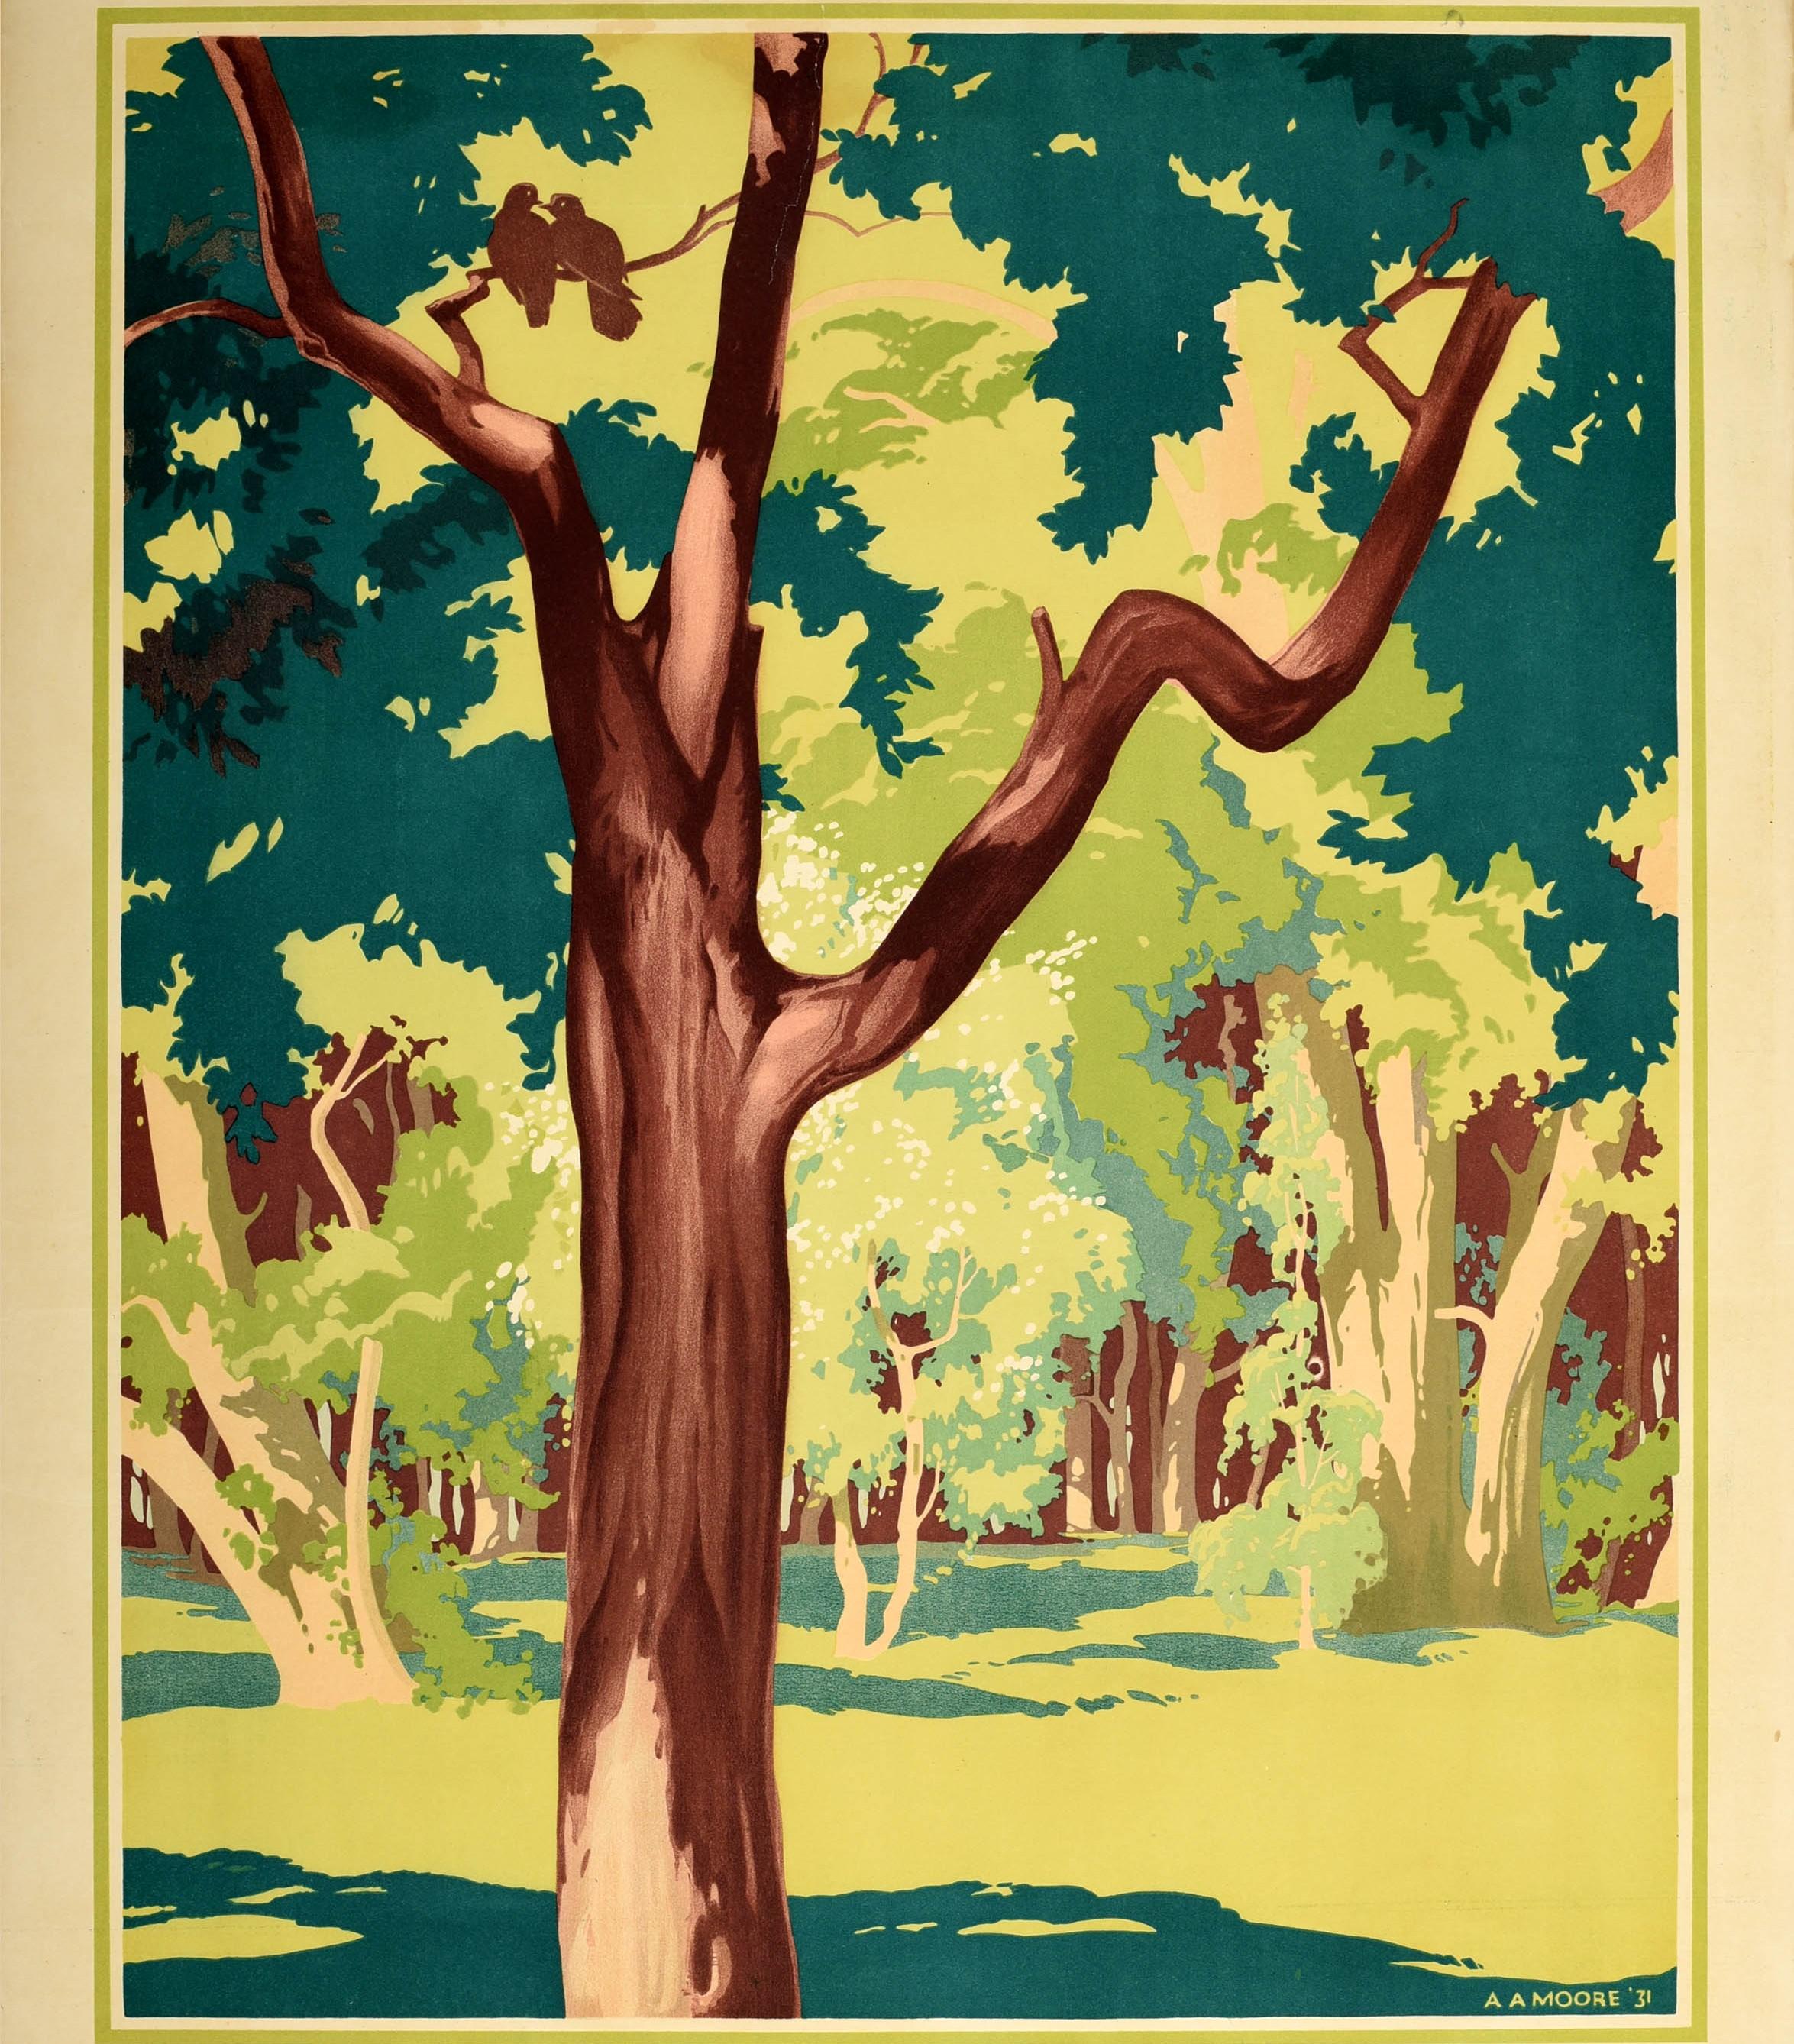 Original vintage London Transport poster featuring a scenic woodland view in the Spring time depicting the light from the sun shining on a clearing of trees casting shadows on the ground with the leaves in different shades of green and the blank